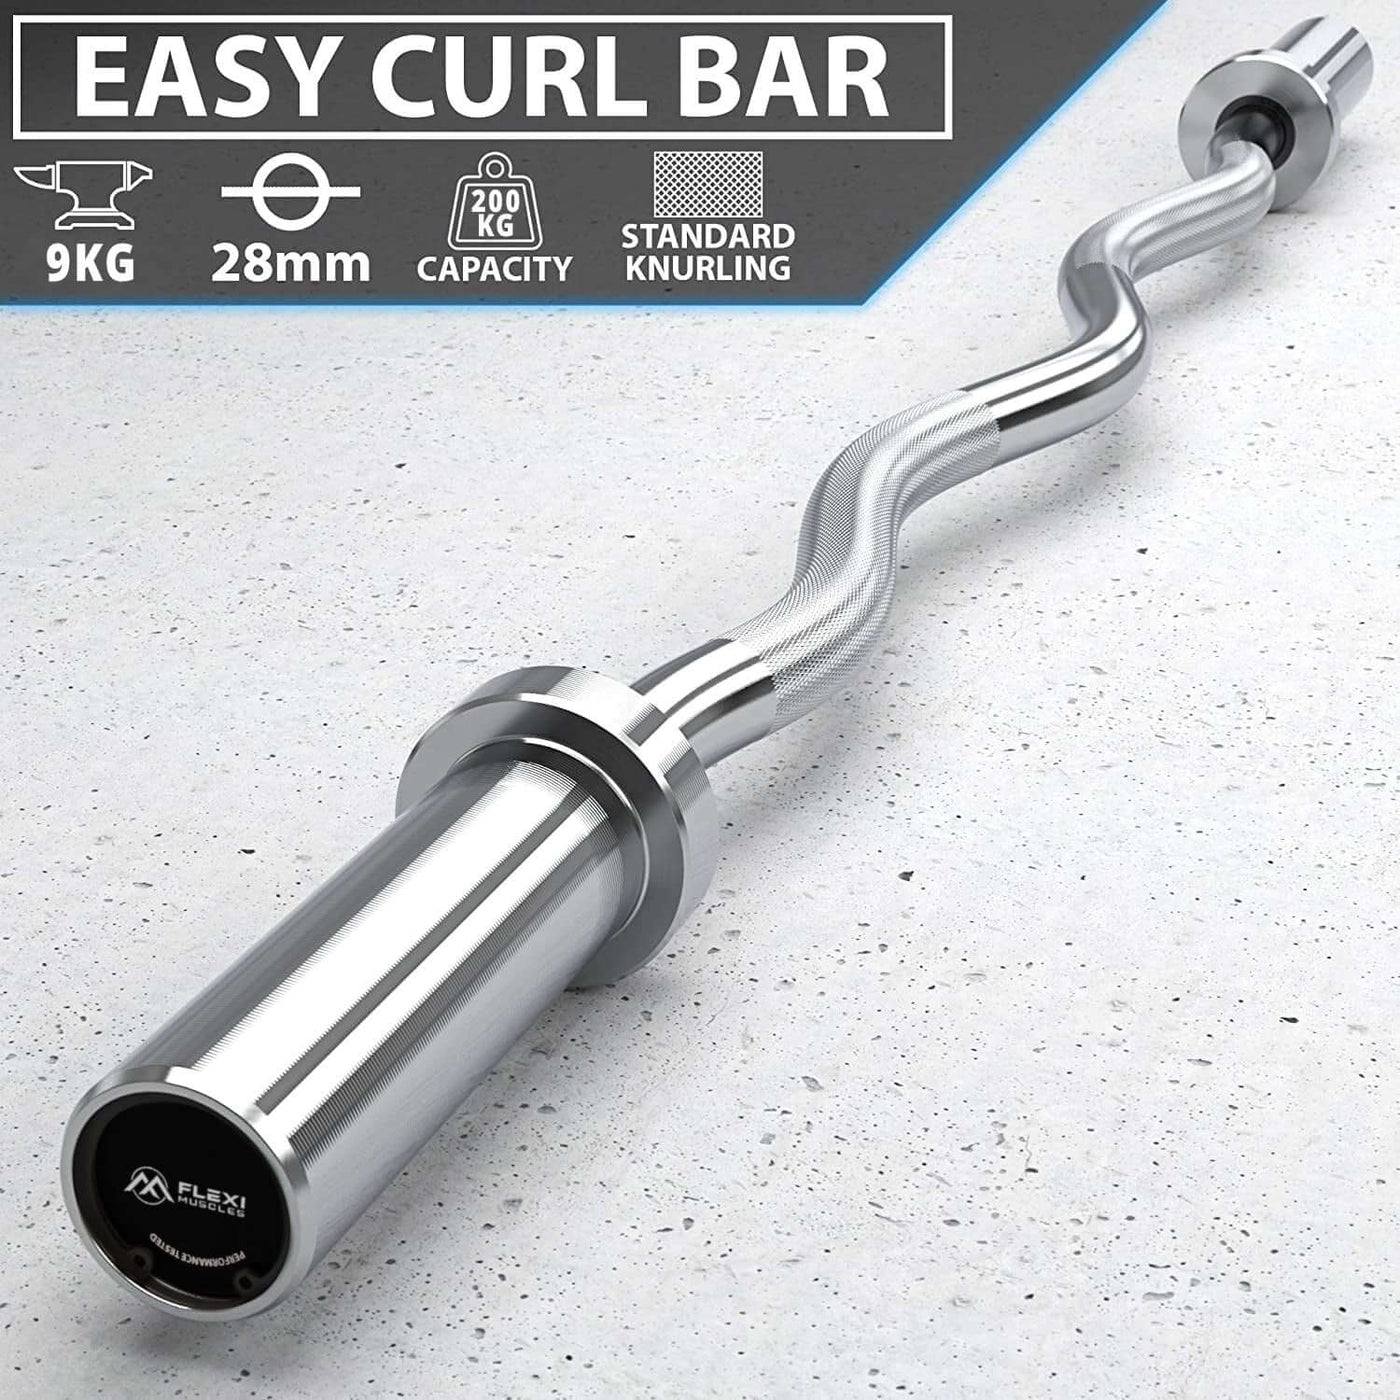 curl barbell bar specifications